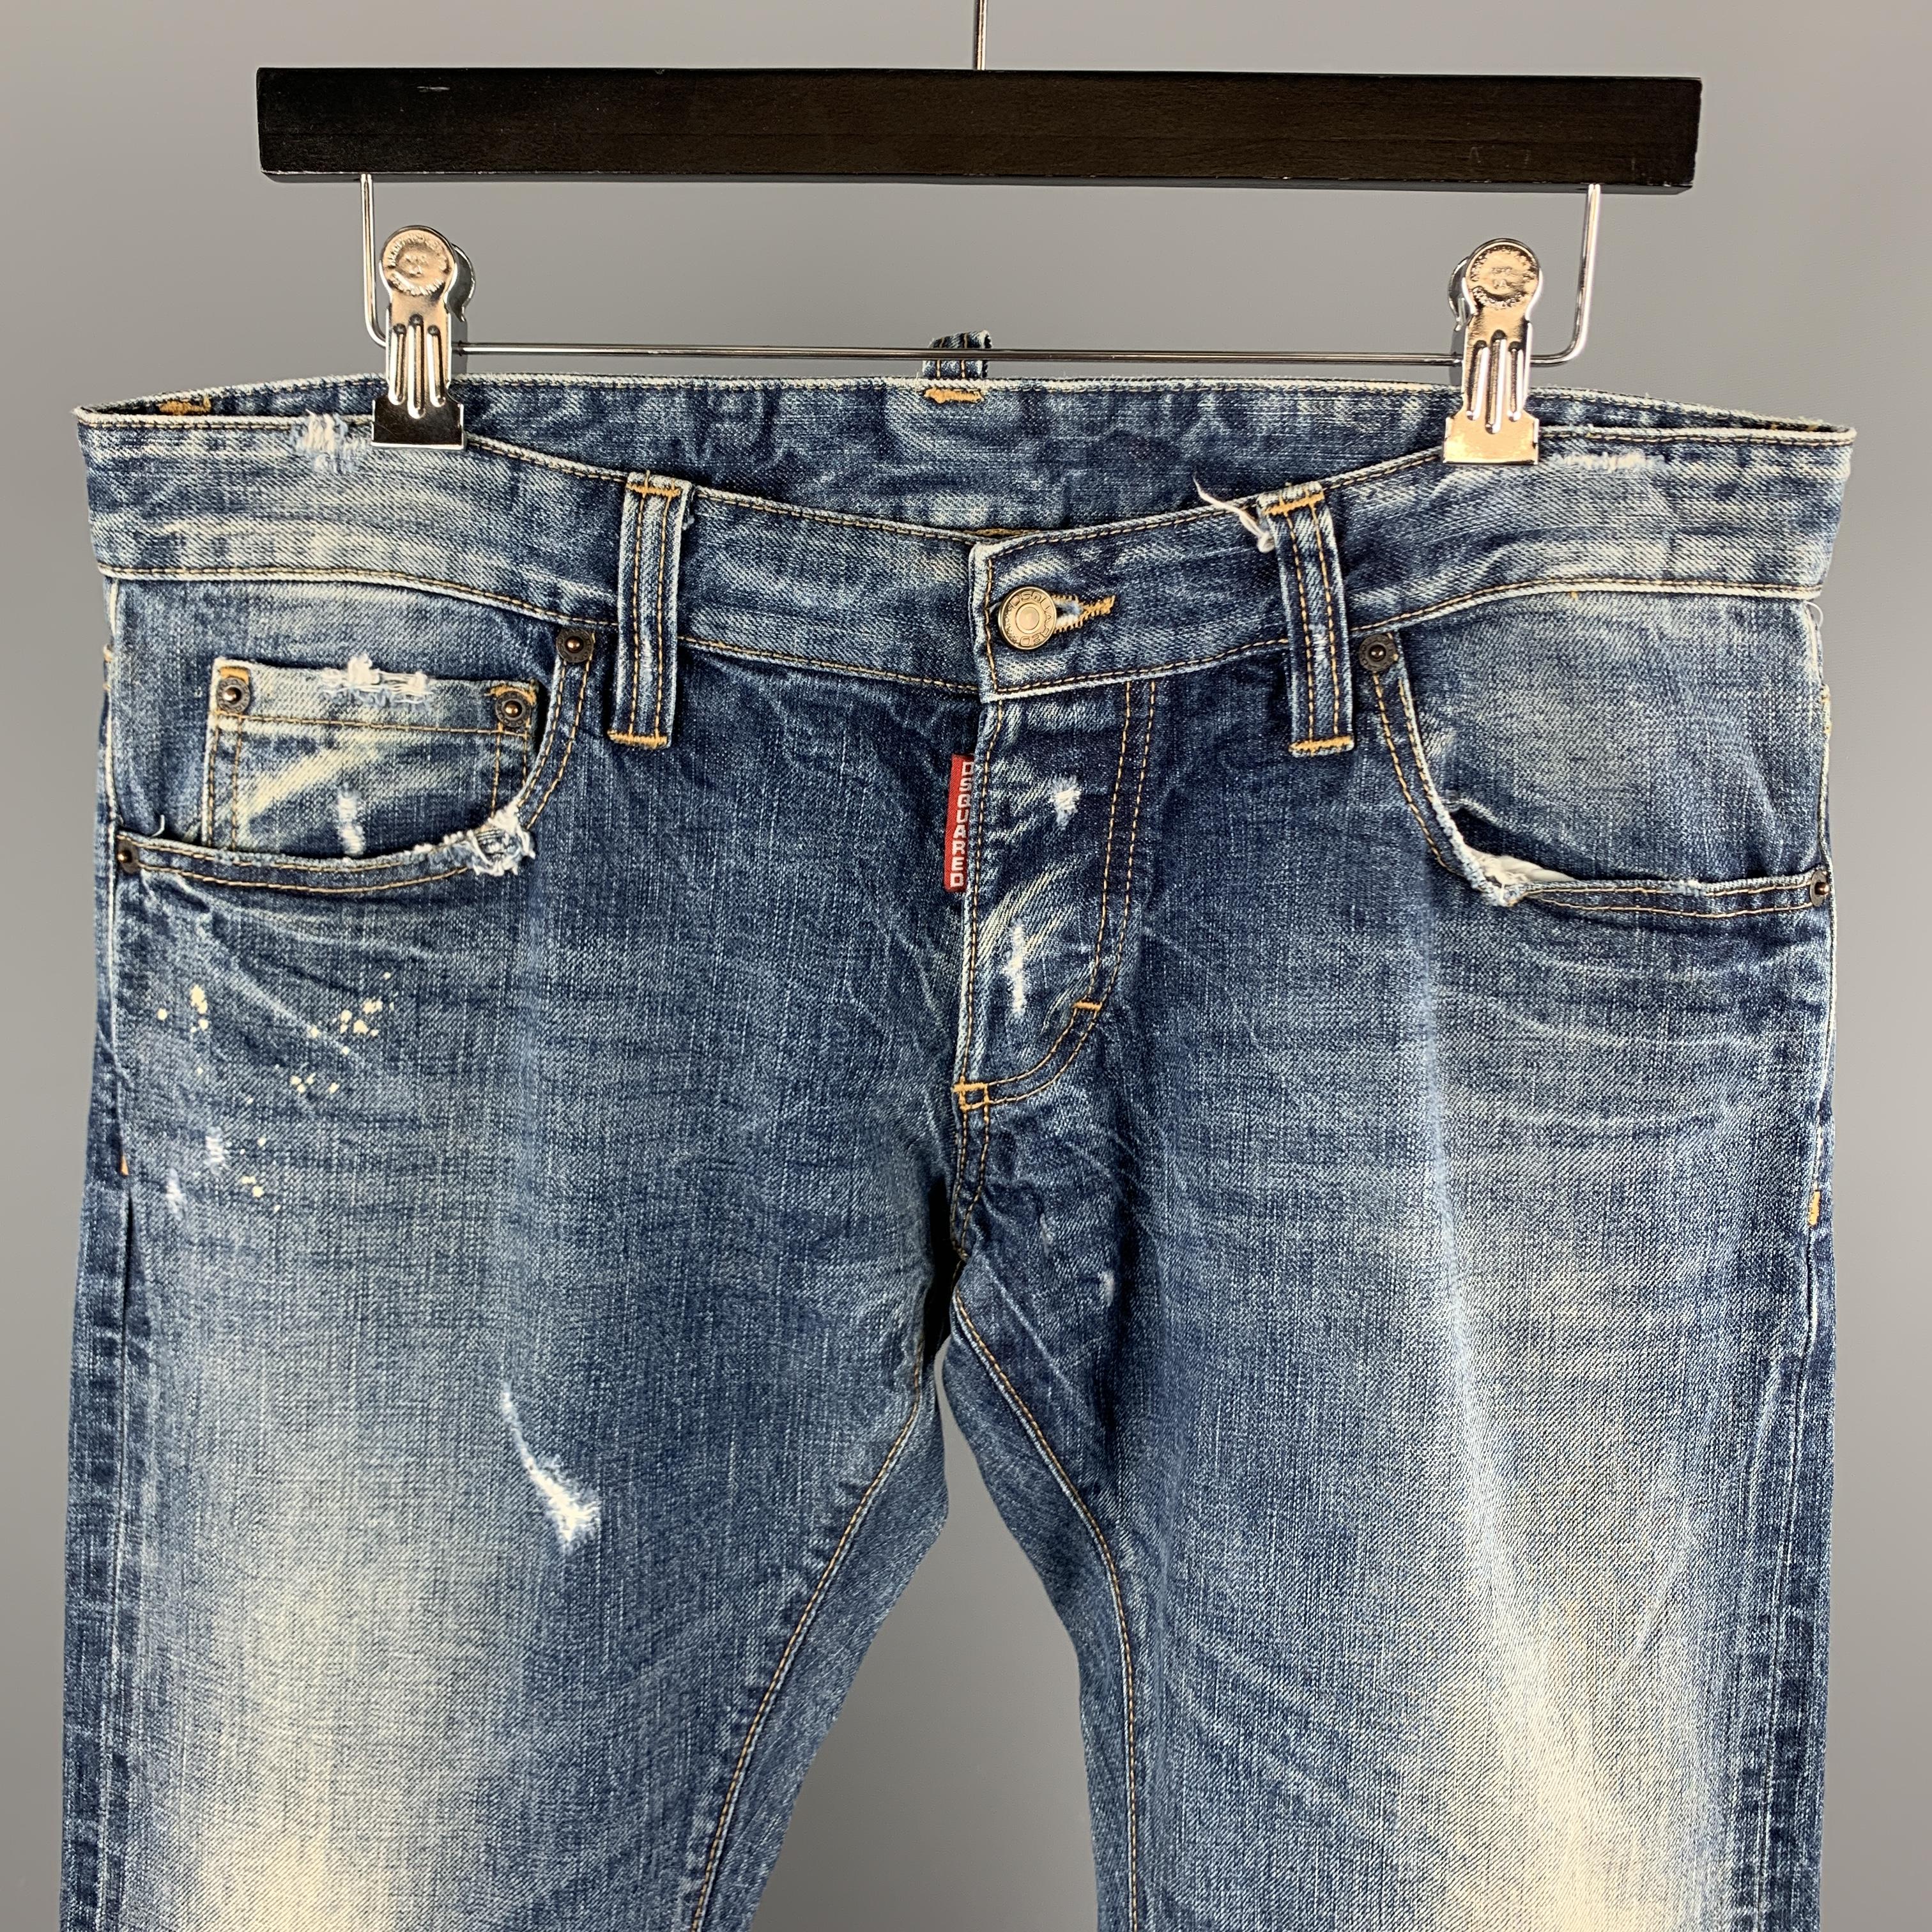 DSQUARED2 jeans comes in a blue washed denim featuring distressed details, contrast stitching, and a button fly closure. Made in Italy. 

Excellent Pre-Owned Condition.
Marked: IT 48

Measurements:

Waist: 32 in. 
Rise: 7 in.
Inseam: 35 in. 